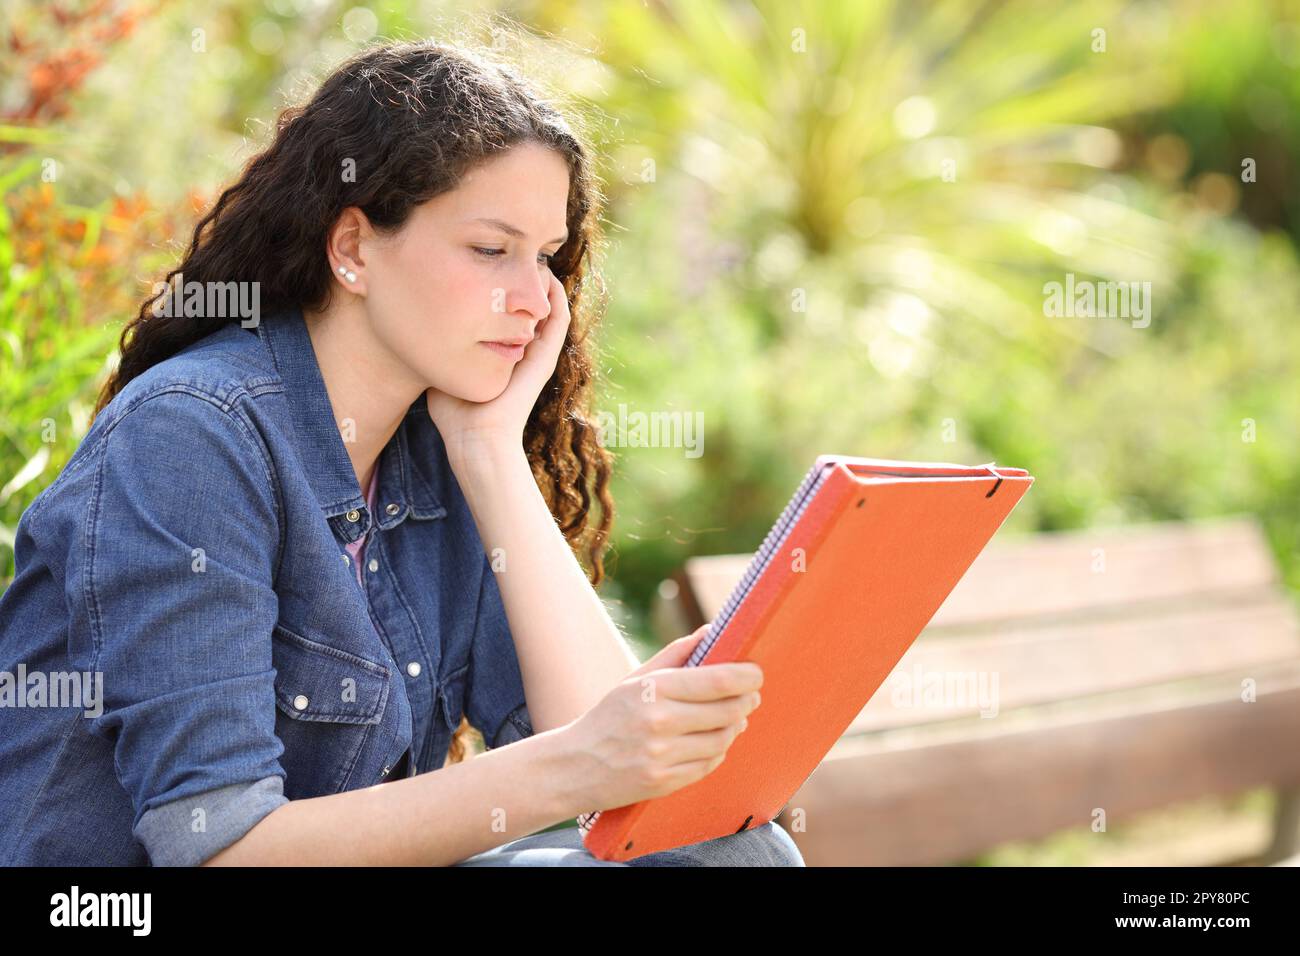 Student learning reading notes sitting in a park Stock Photo